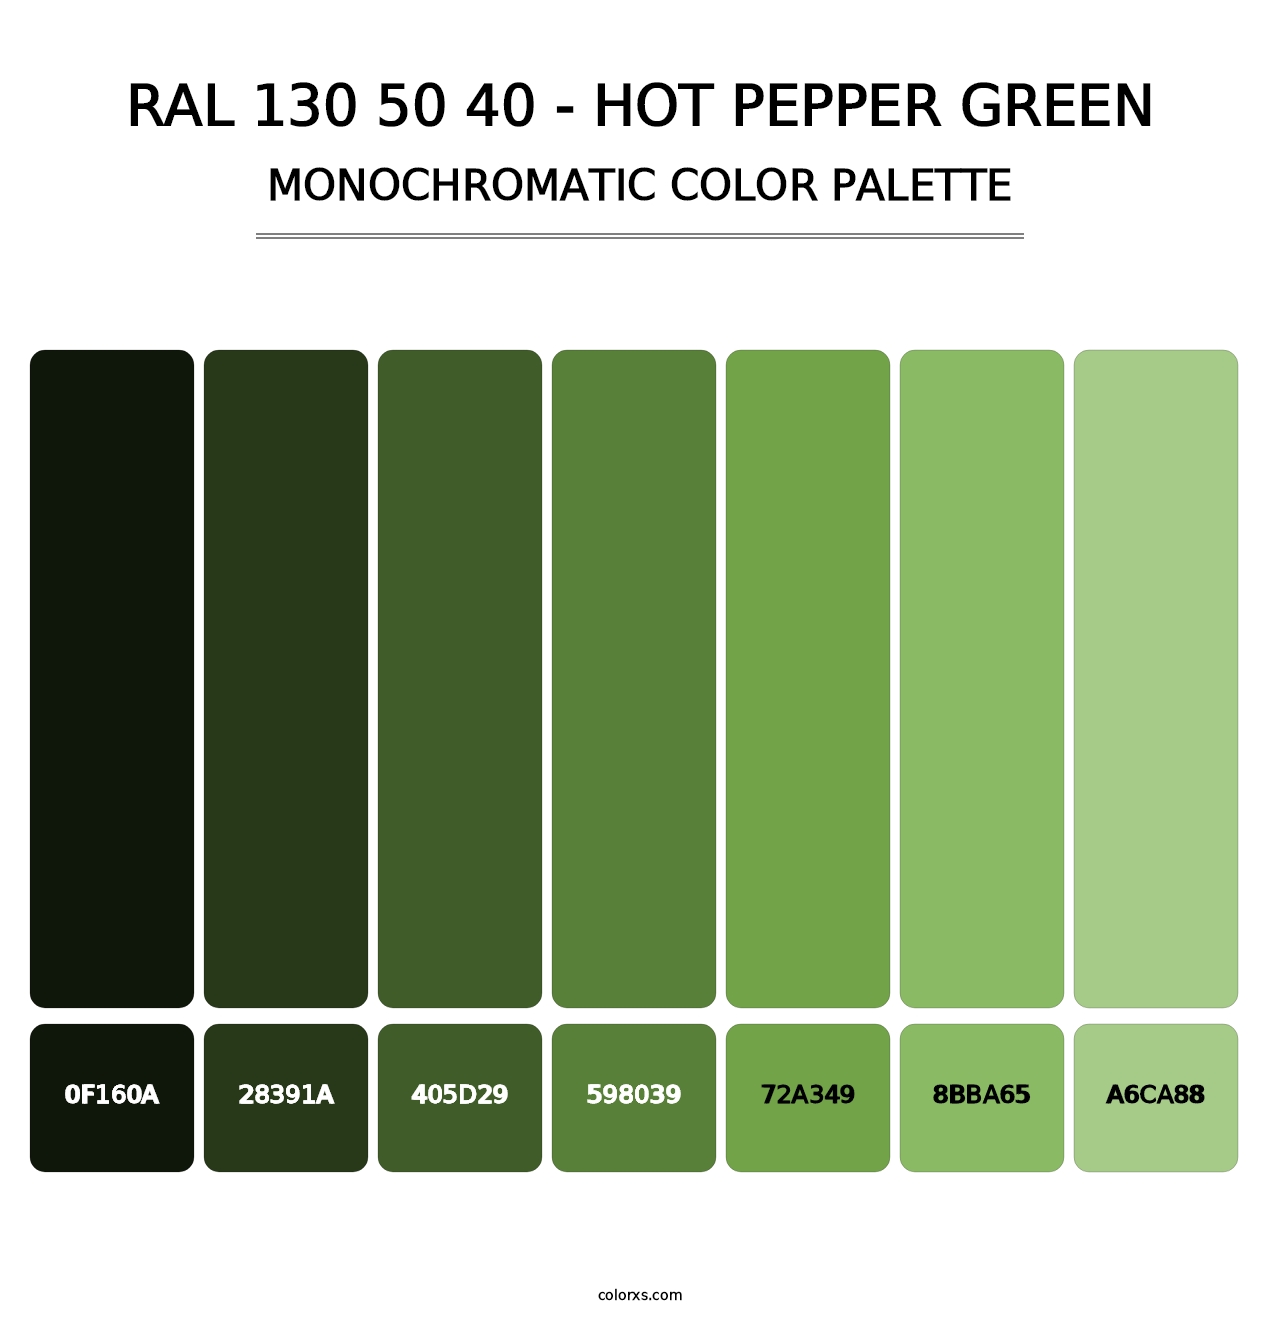 RAL 130 50 40 - Hot Pepper Green - Monochromatic Color Palette